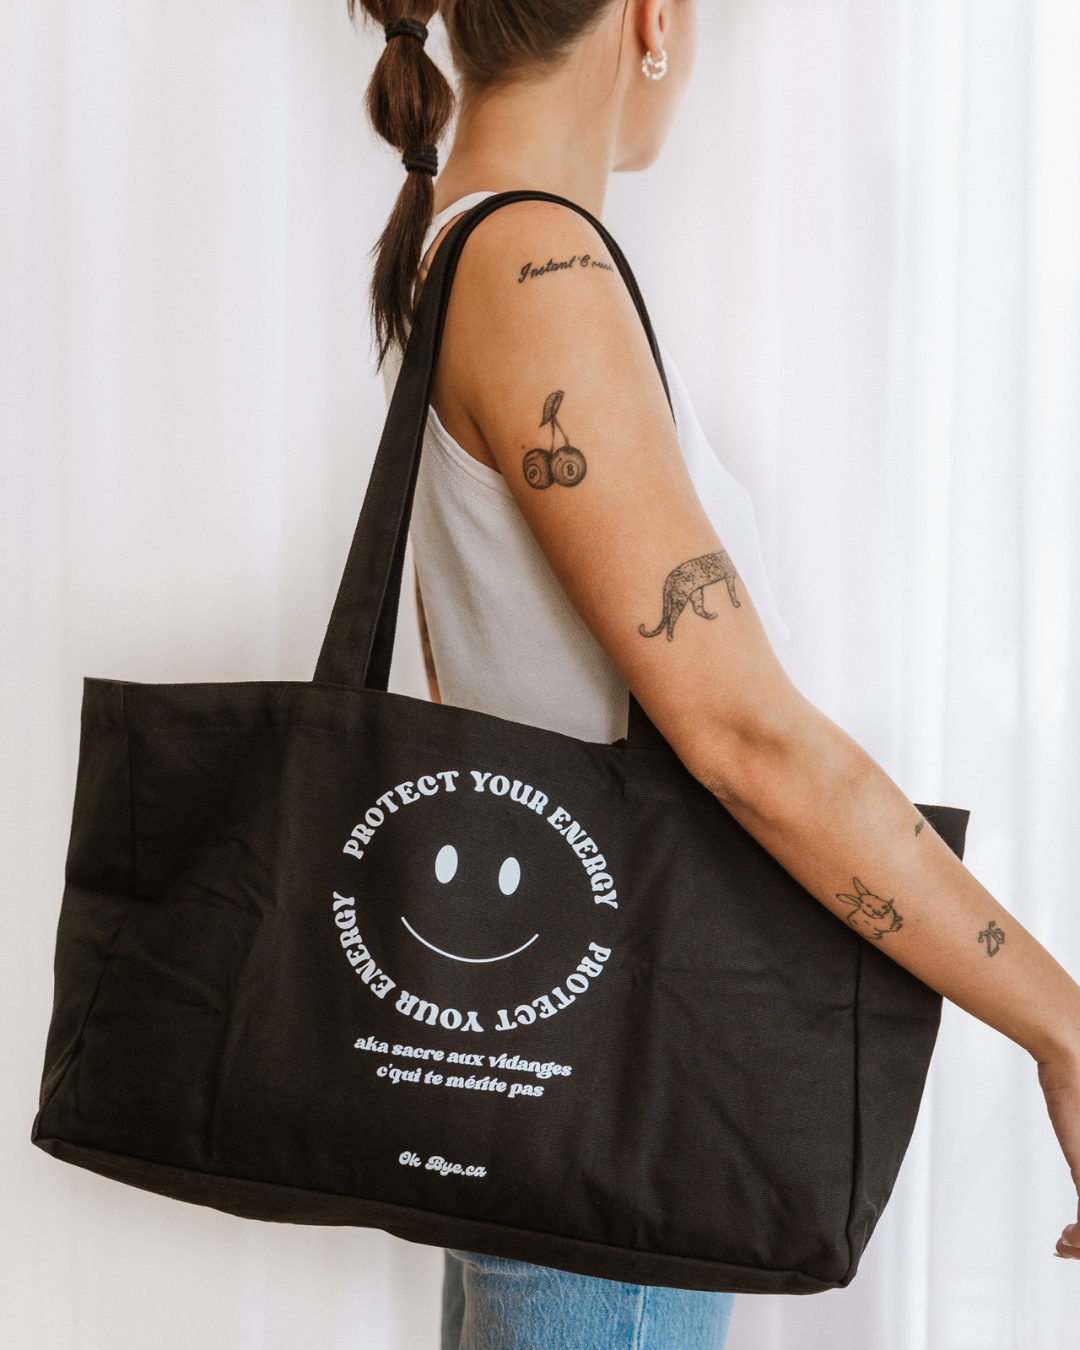 Protect your energy - Tote Bag